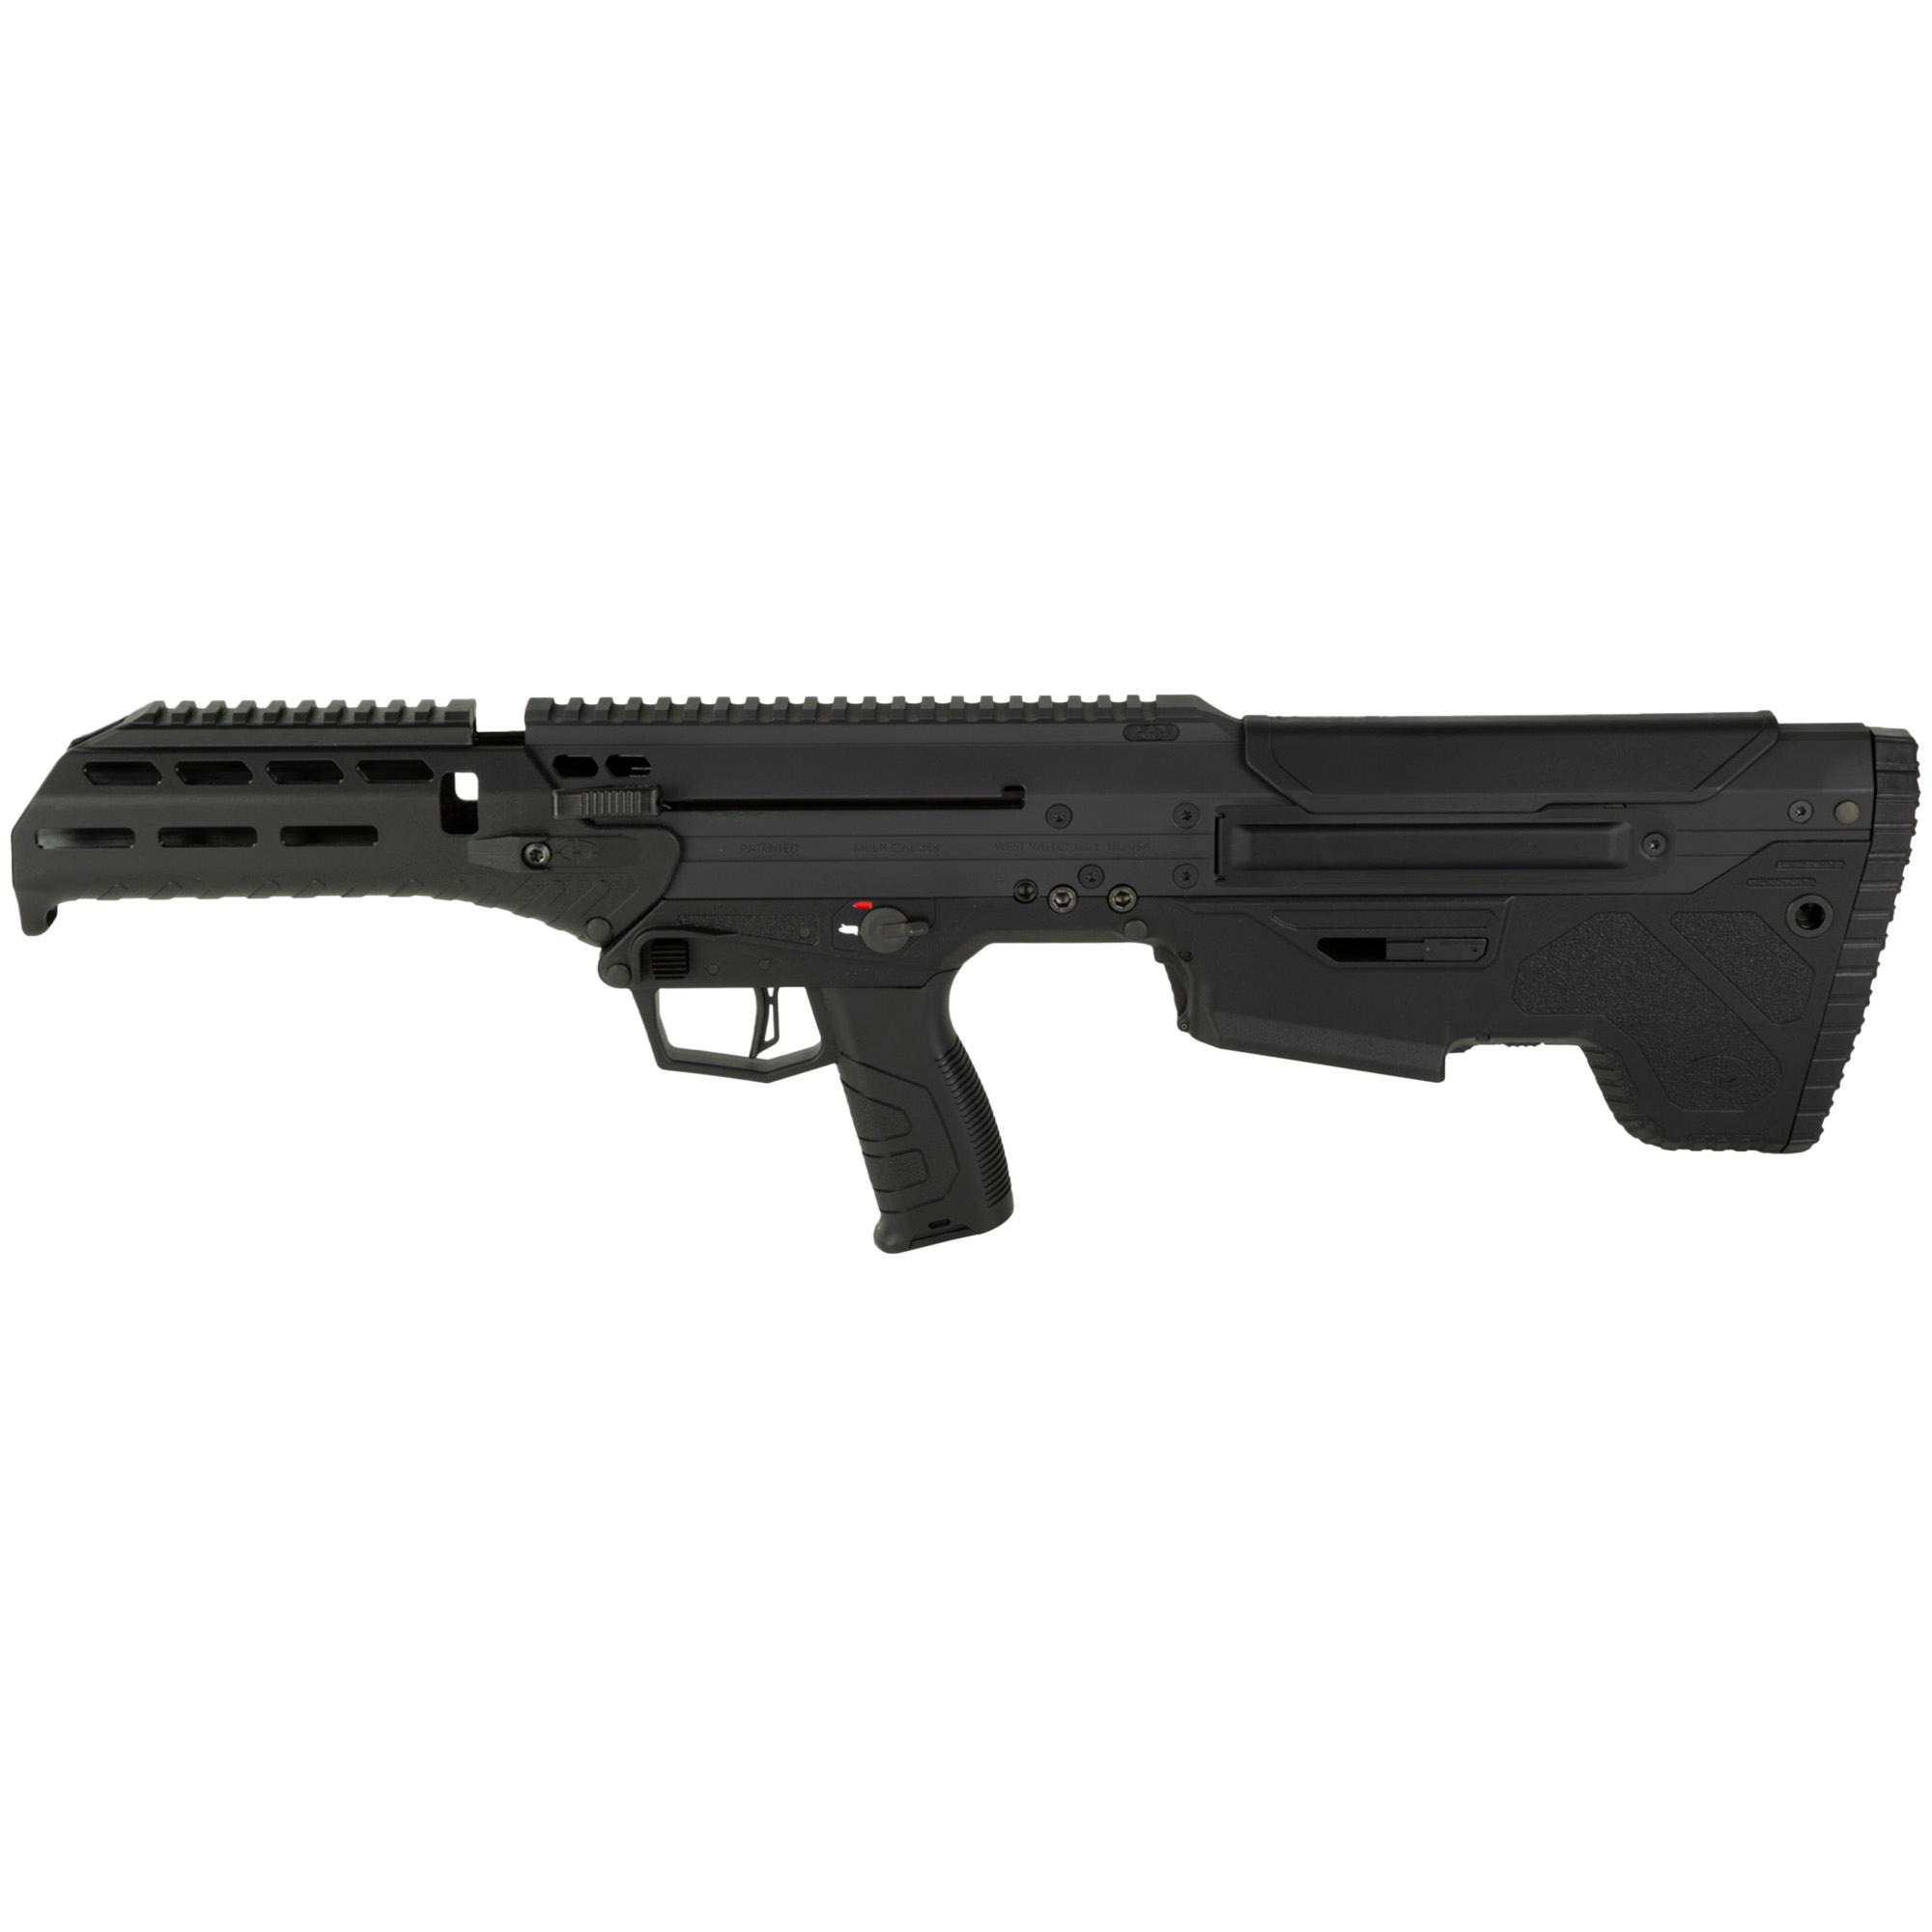 Long Guns DT MDRX CHASSIS SIDE BLK image 1